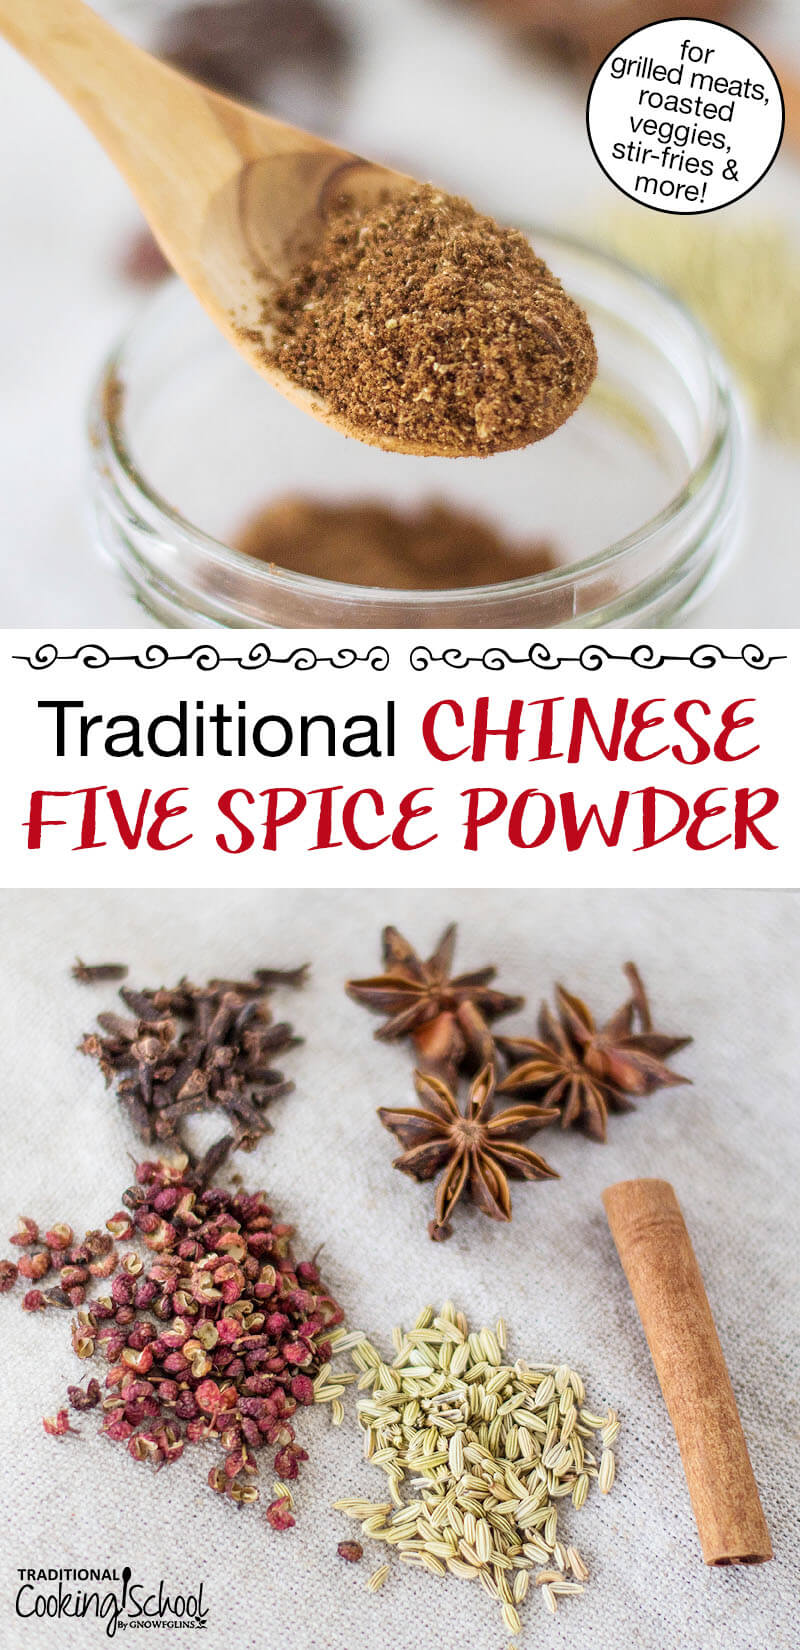 Photo collage of whole spices (Szechuan peppercorns, cloves, star anise, fennel seed, and a cinnamon stick) and the spices ground into powder. Text overlay says: "Traditional Chinese Five Spice POwder (for grilled meats, roasted veggies, stir-fries & more!)"